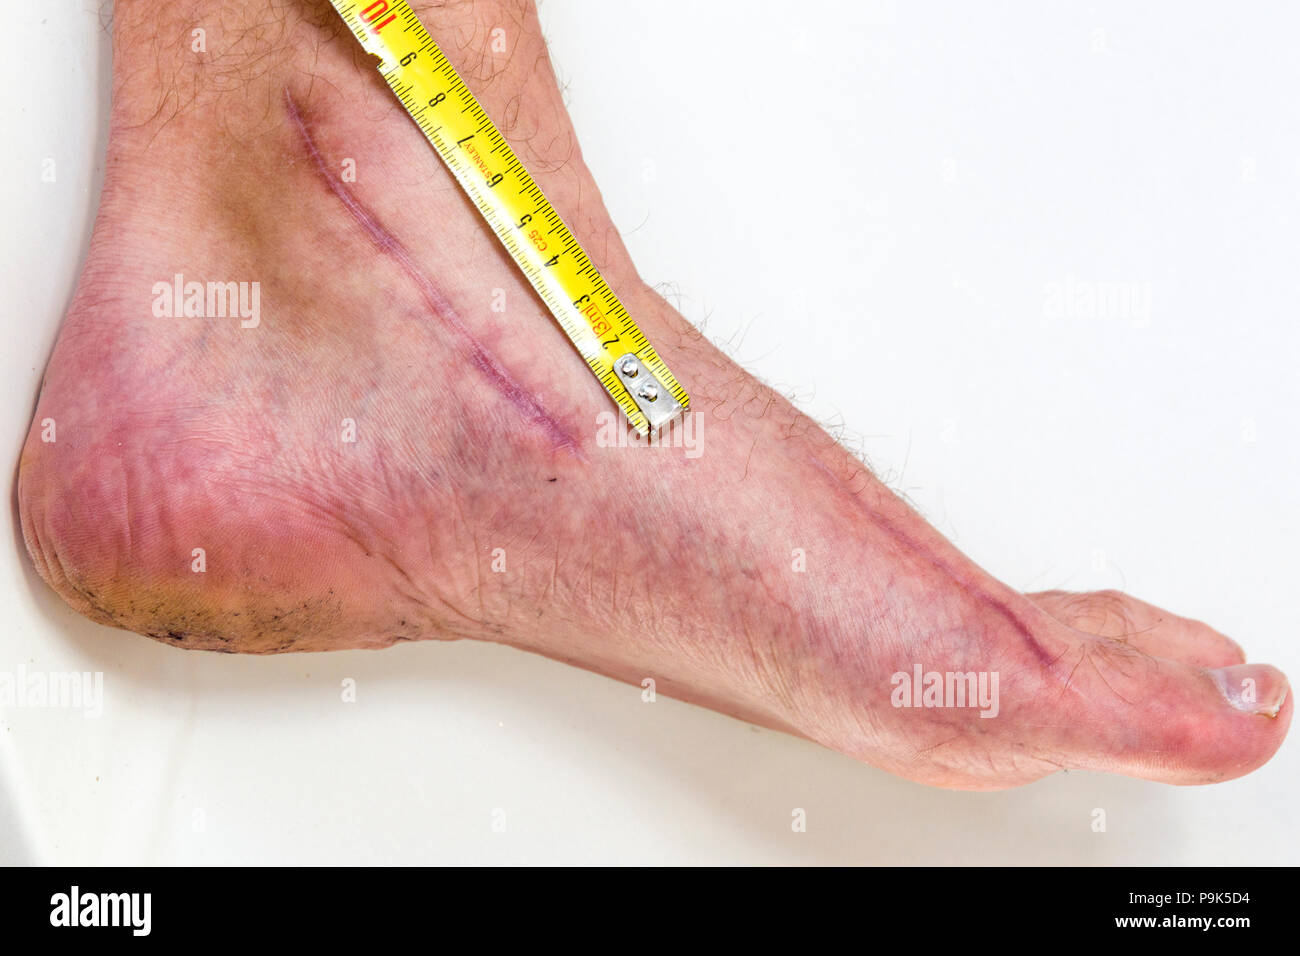 FLODA, SWEDEN - MAY 8 2017: Adult male person's post surgery scar and measuring tape on white background Stock Photo